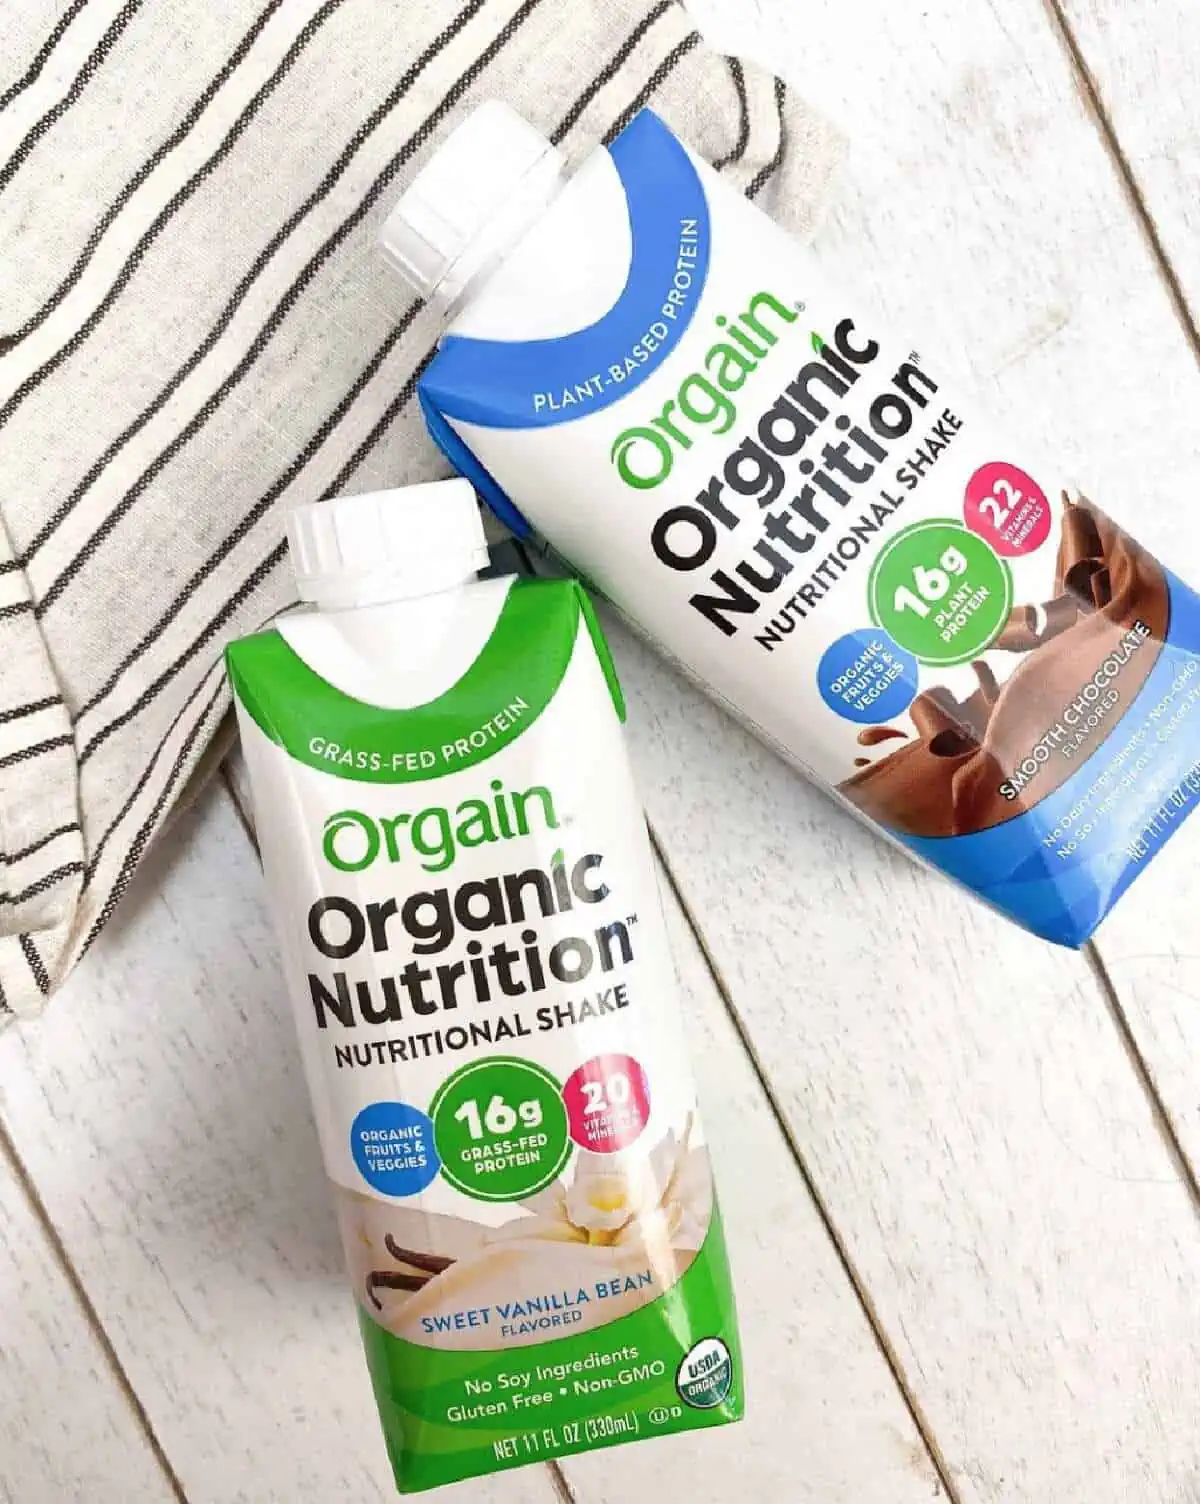 Two Orgain Organic nutrition shakes in vanilla and chocolate flavors leaning against a striped pillow on the light wood background.